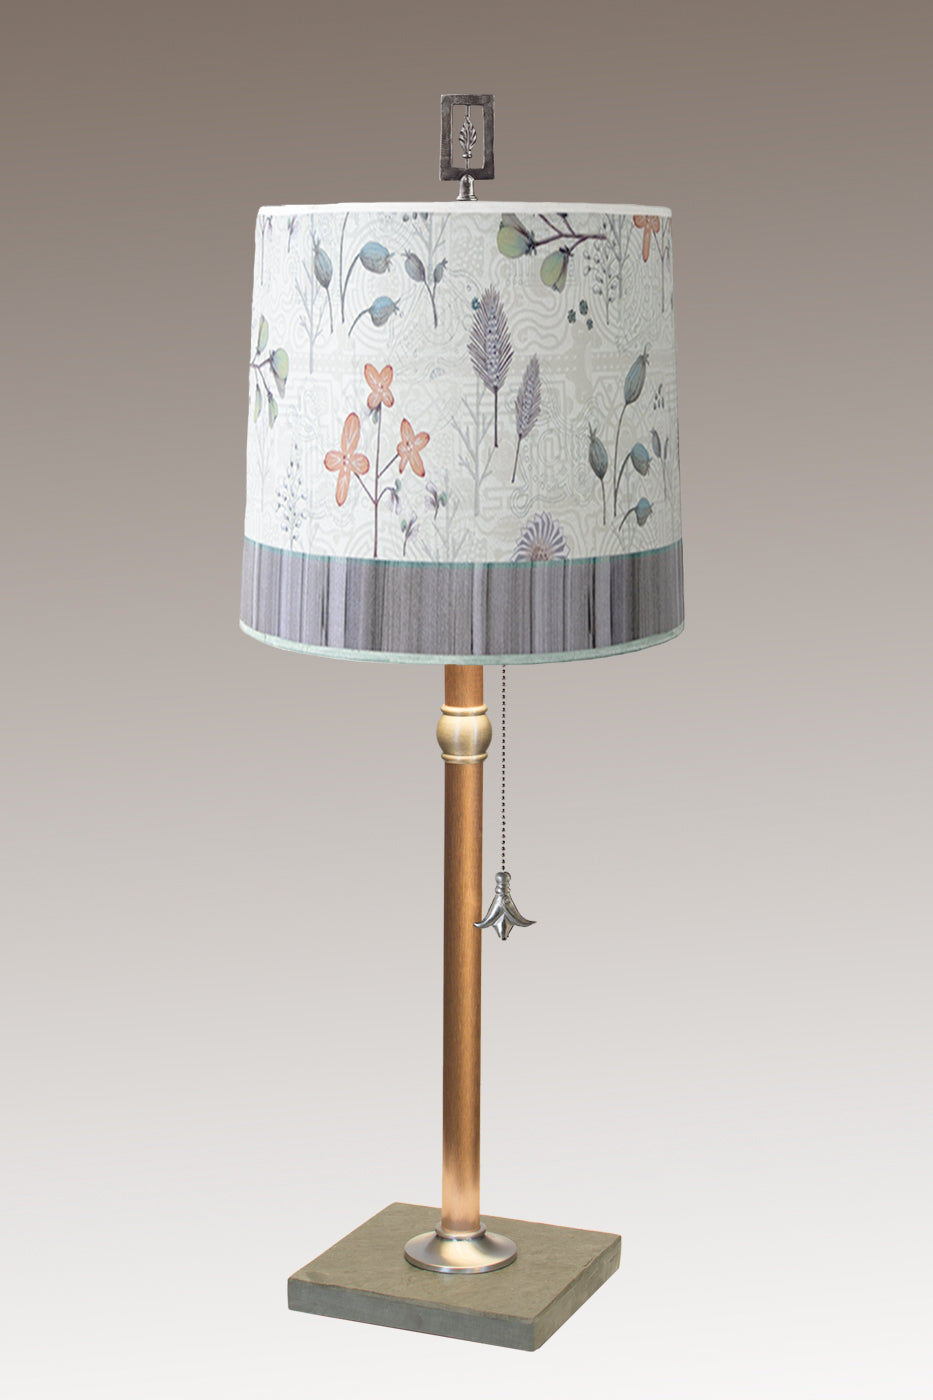 Janna Ugone & Co Table Lamps Copper Table Lamp with Medium Drum Shade in Flora & Maze